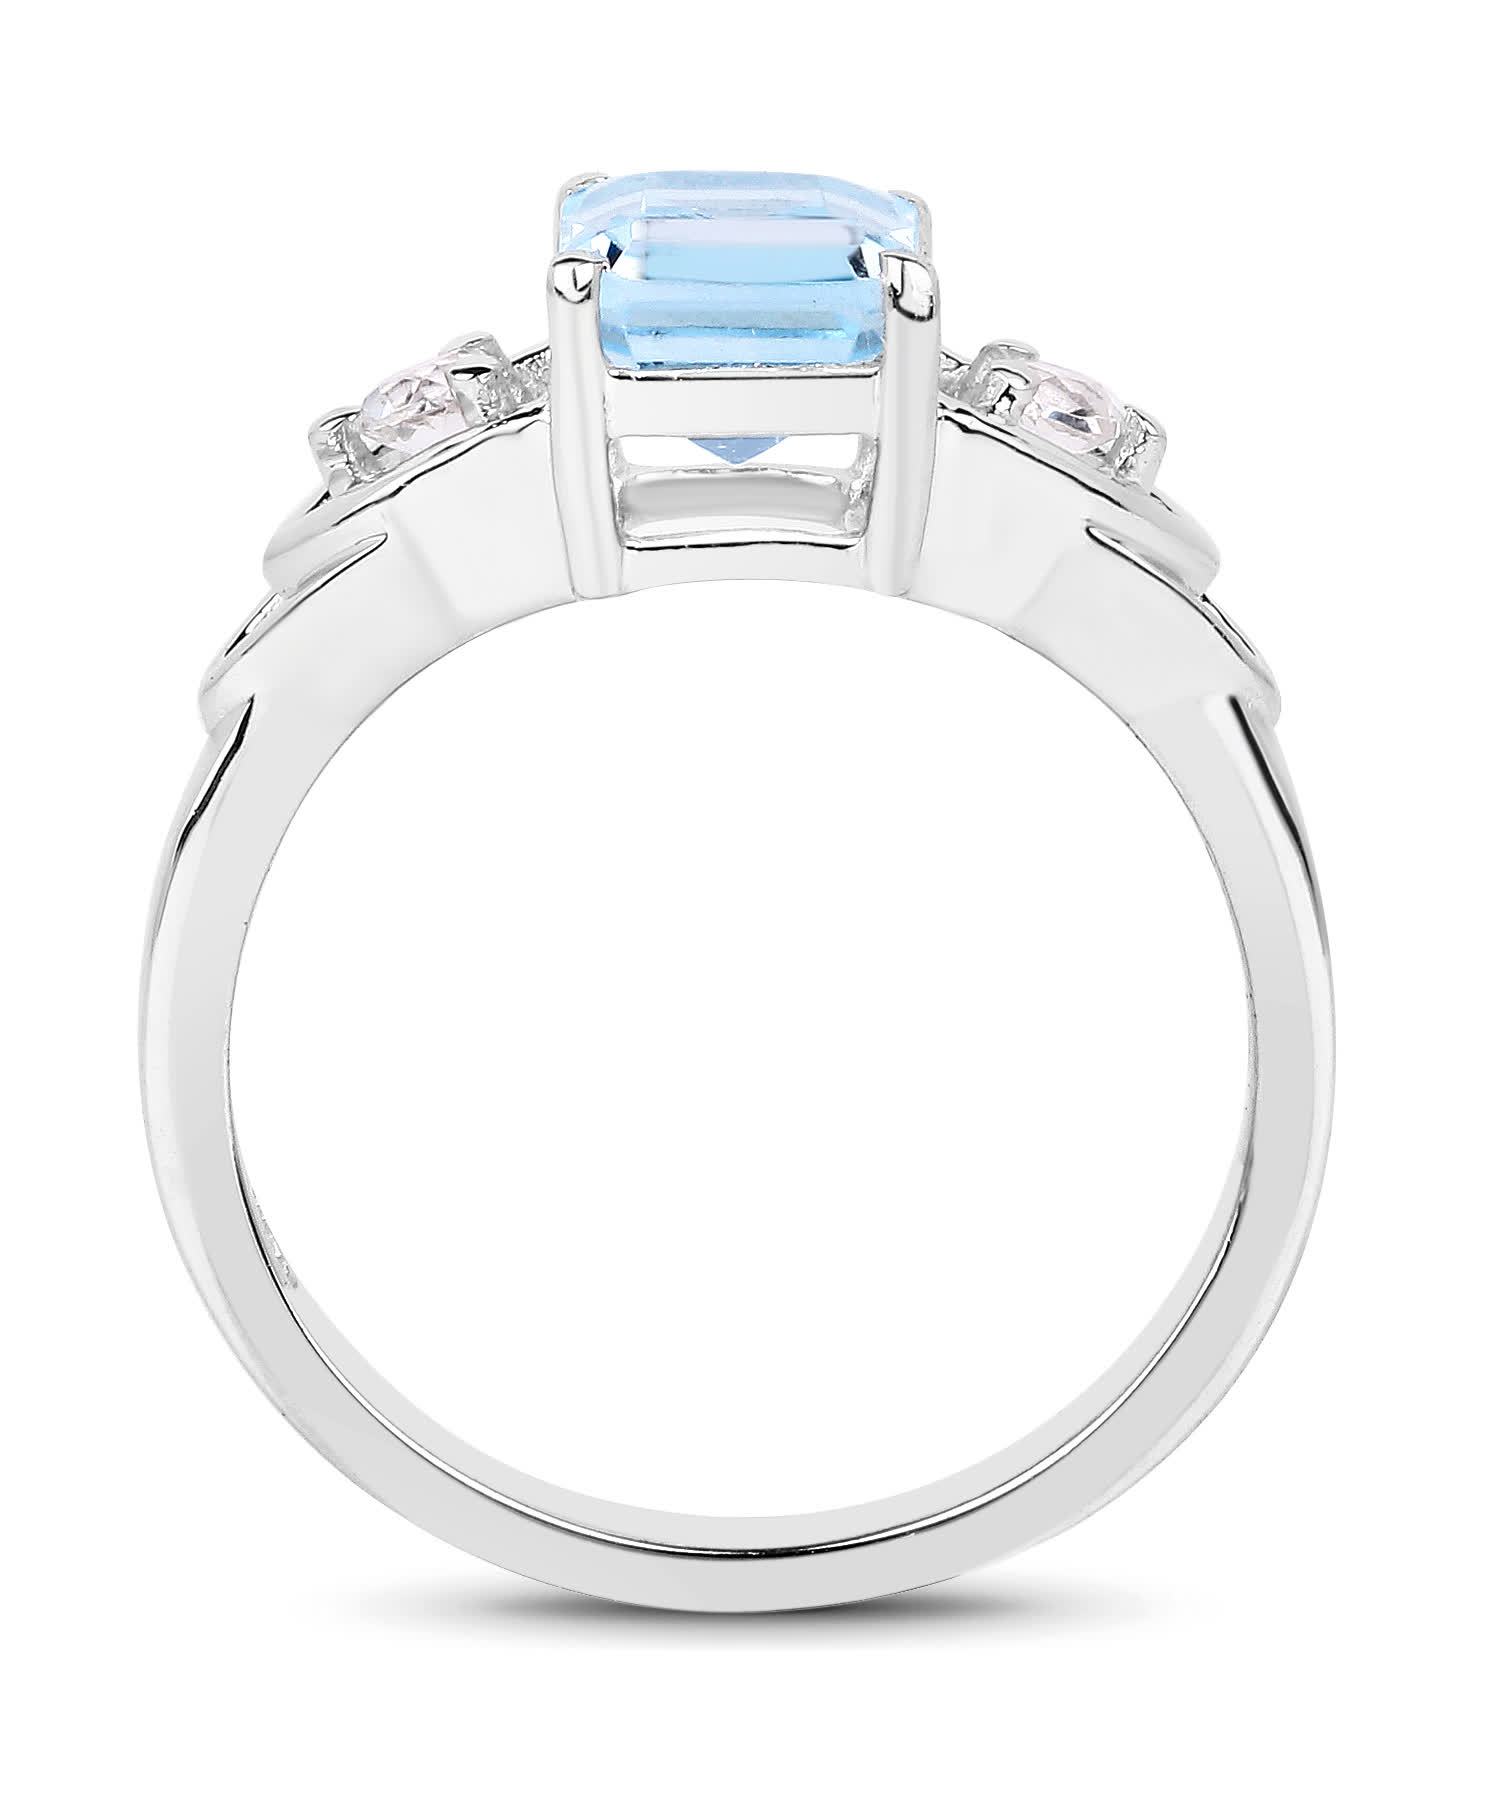 1.76ctw Natural Sky Blue Topaz Rhodium Plated 925 Sterling Silver Right Hand Ring View 2